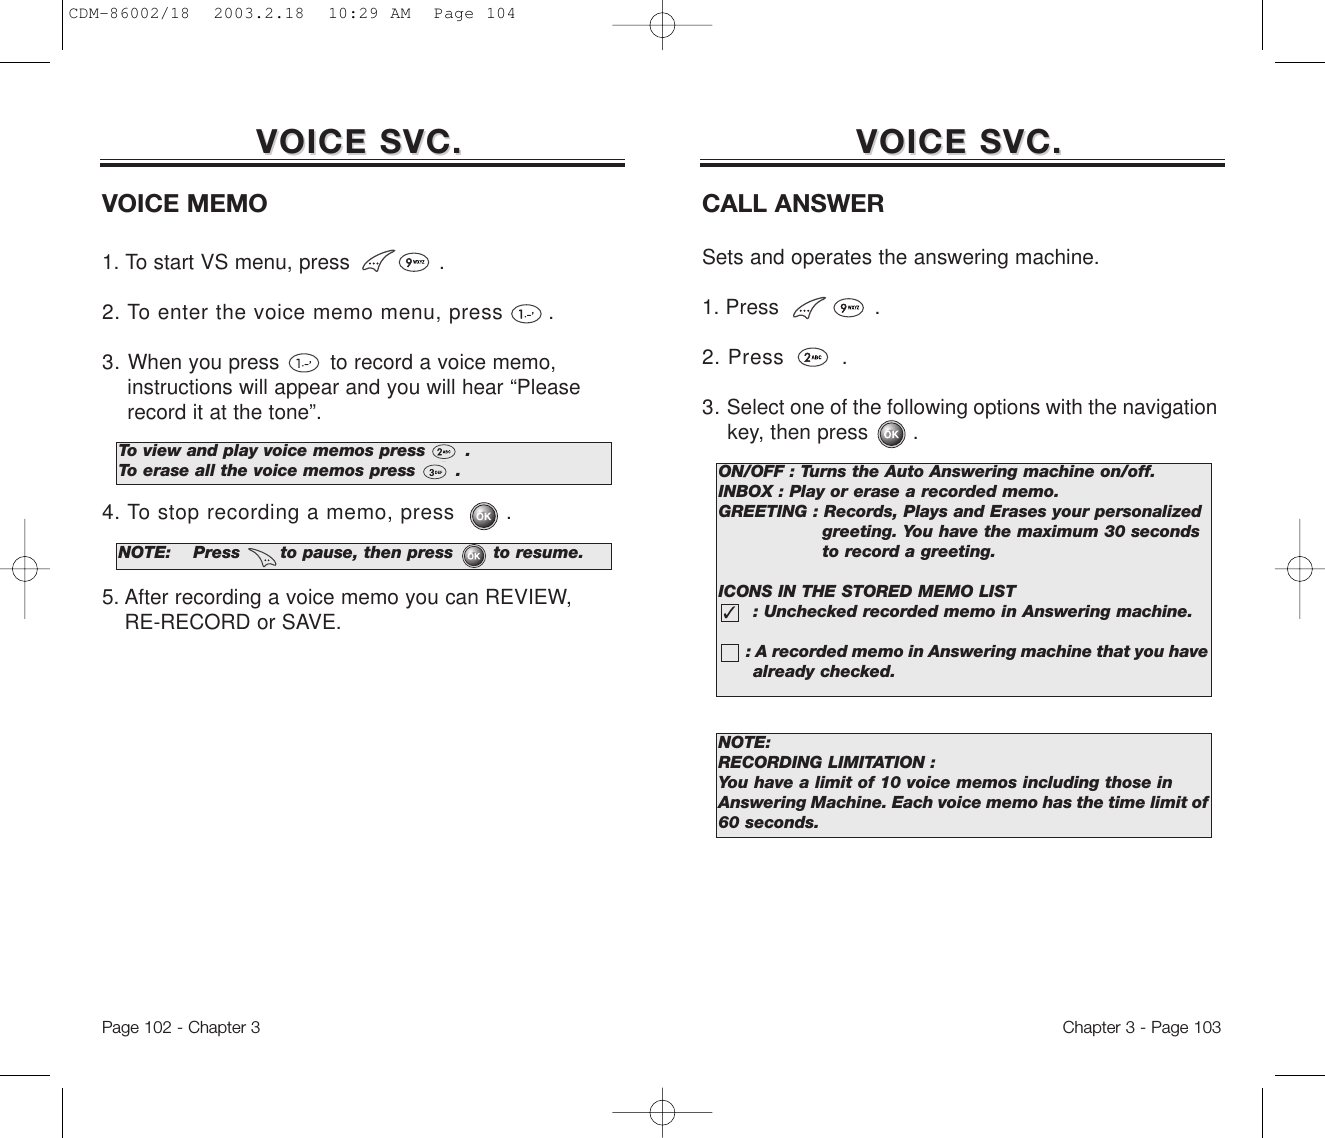 Chapter 3 - Page 103Page 102 - Chapter 3VOICE SVC.VOICE SVC. VOICE SVC.VOICE SVC.VOICE MEMO1. To start VS menu, press              .2. To enter the voice memo menu, press .3. When you press        to record a voice memo, instructions will appear and you will hear “Please record it at the tone”.4. To stop recording a memo, press .5. After recording a voice memo you can REVIEW, RE-RECORD or SAVE.To view and play voice memos press       .To erase all the voice memos press       .NOTE: Press       to pause, then press       to resume.CALL ANSWERSets and operates the answering machine.1. Press               .2. Press .3. Select one of the following options with the navigation key, then press       .ON/OFF : Turns the Auto Answering machine on/off.INBOX : Play or erase a recorded memo.GREETING : Records, Plays and Erases your personalized greeting. You have the maximum 30 seconds to record a greeting.ICONS IN THE STORED MEMO LIST: Unchecked recorded memo in Answering machine. : A recorded memo in Answering machine that you have  already checked.✓NOTE:RECORDING LIMITATION :You have a limit of 10 voice memos including those inAnswering Machine. Each voice memo has the time limit of60 seconds.CDM-86002/18  2003.2.18  10:29 AM  Page 104